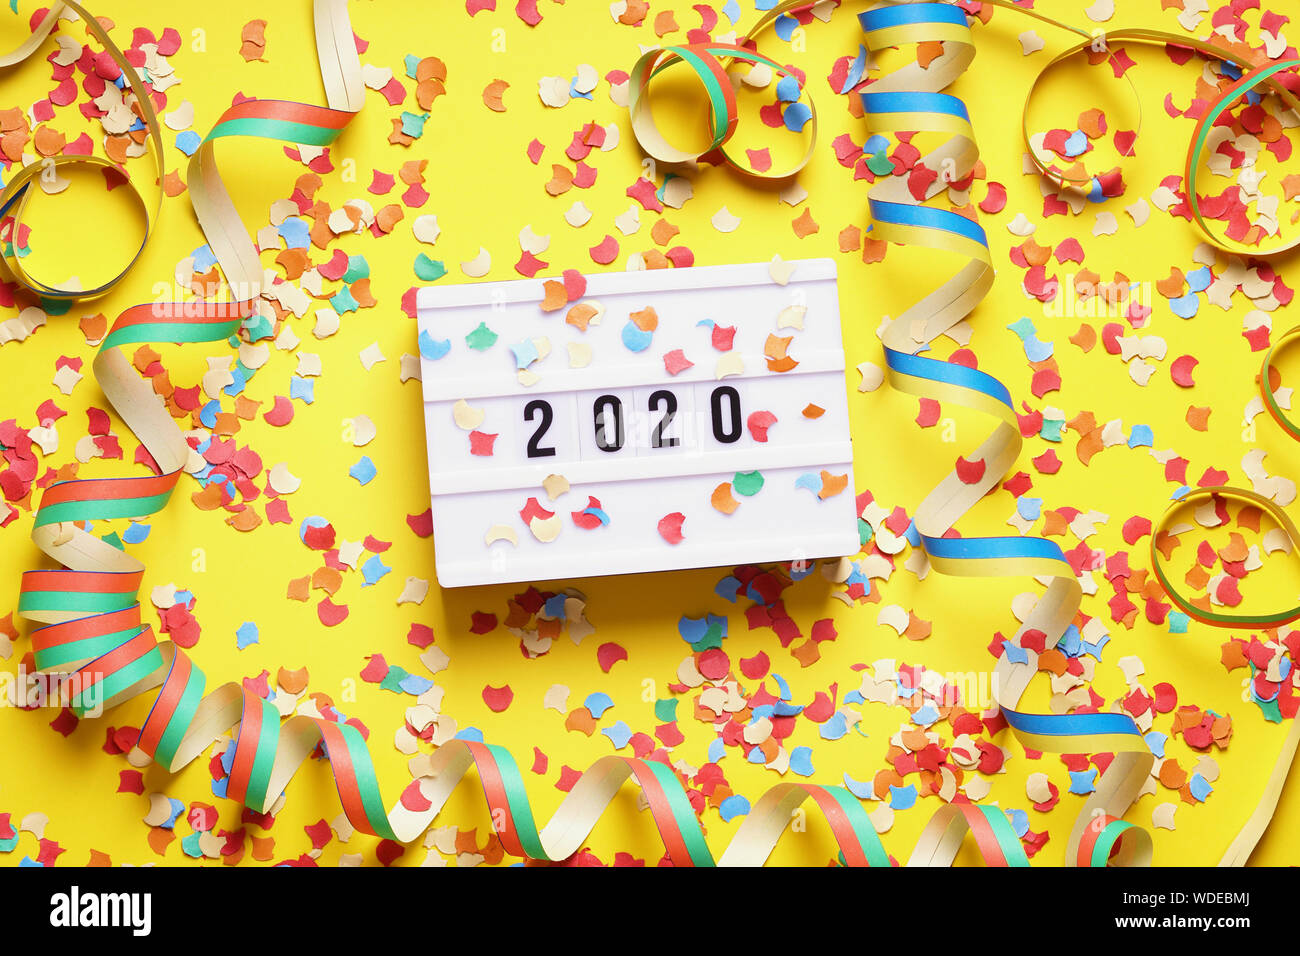 2020 new year celebration flat lay concept with confetti and streamers Stock Photo